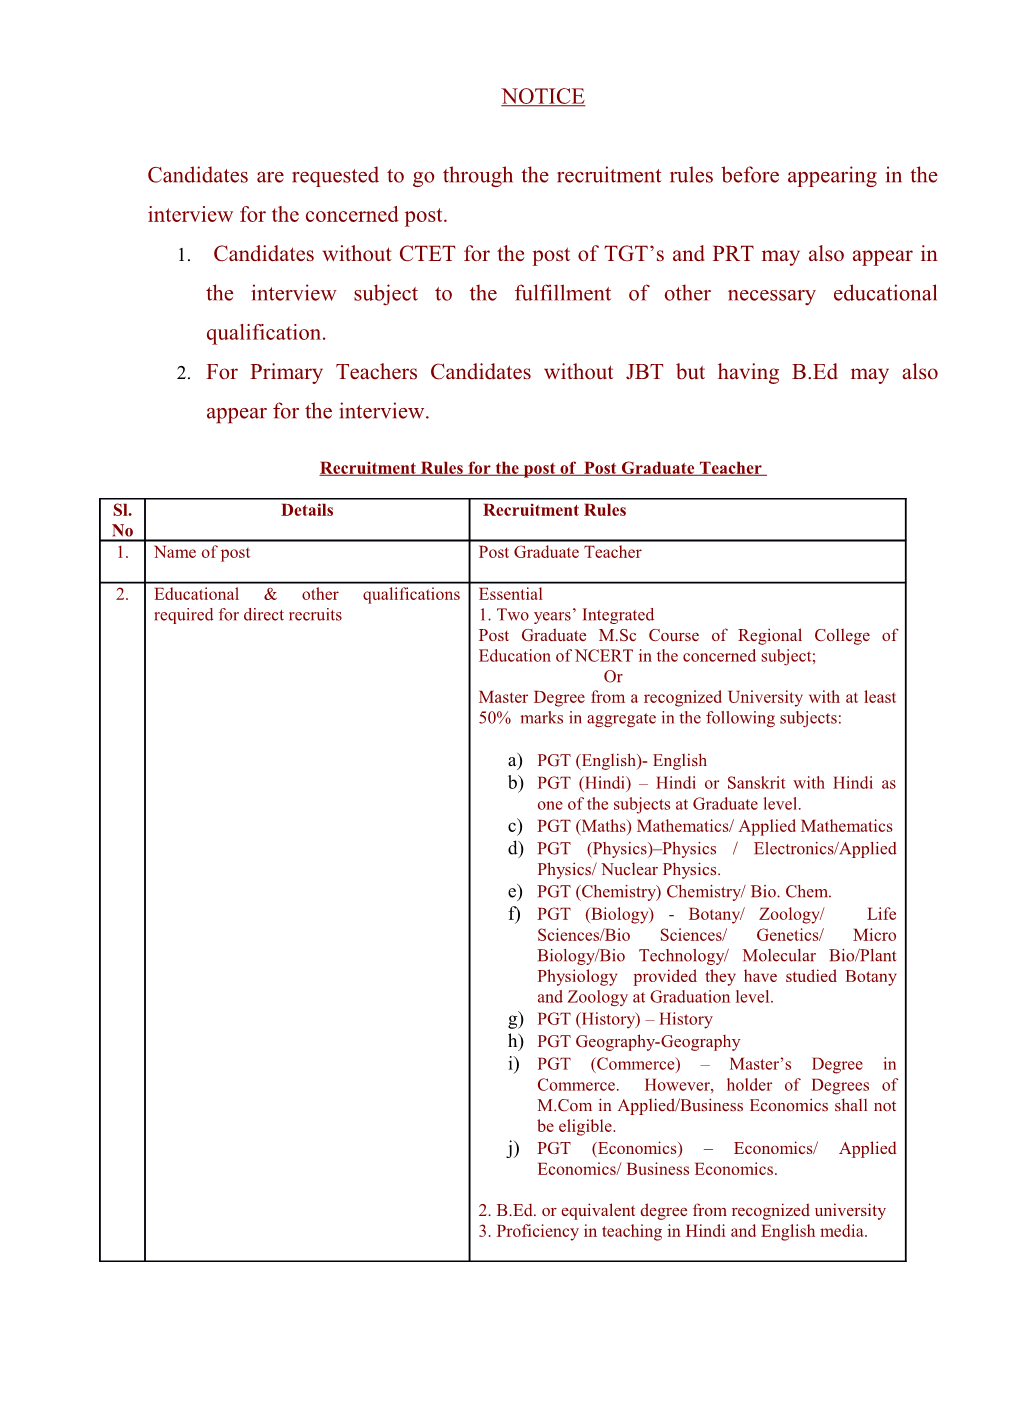 Recruitment Rules for the Post of Post Graduate Teacher